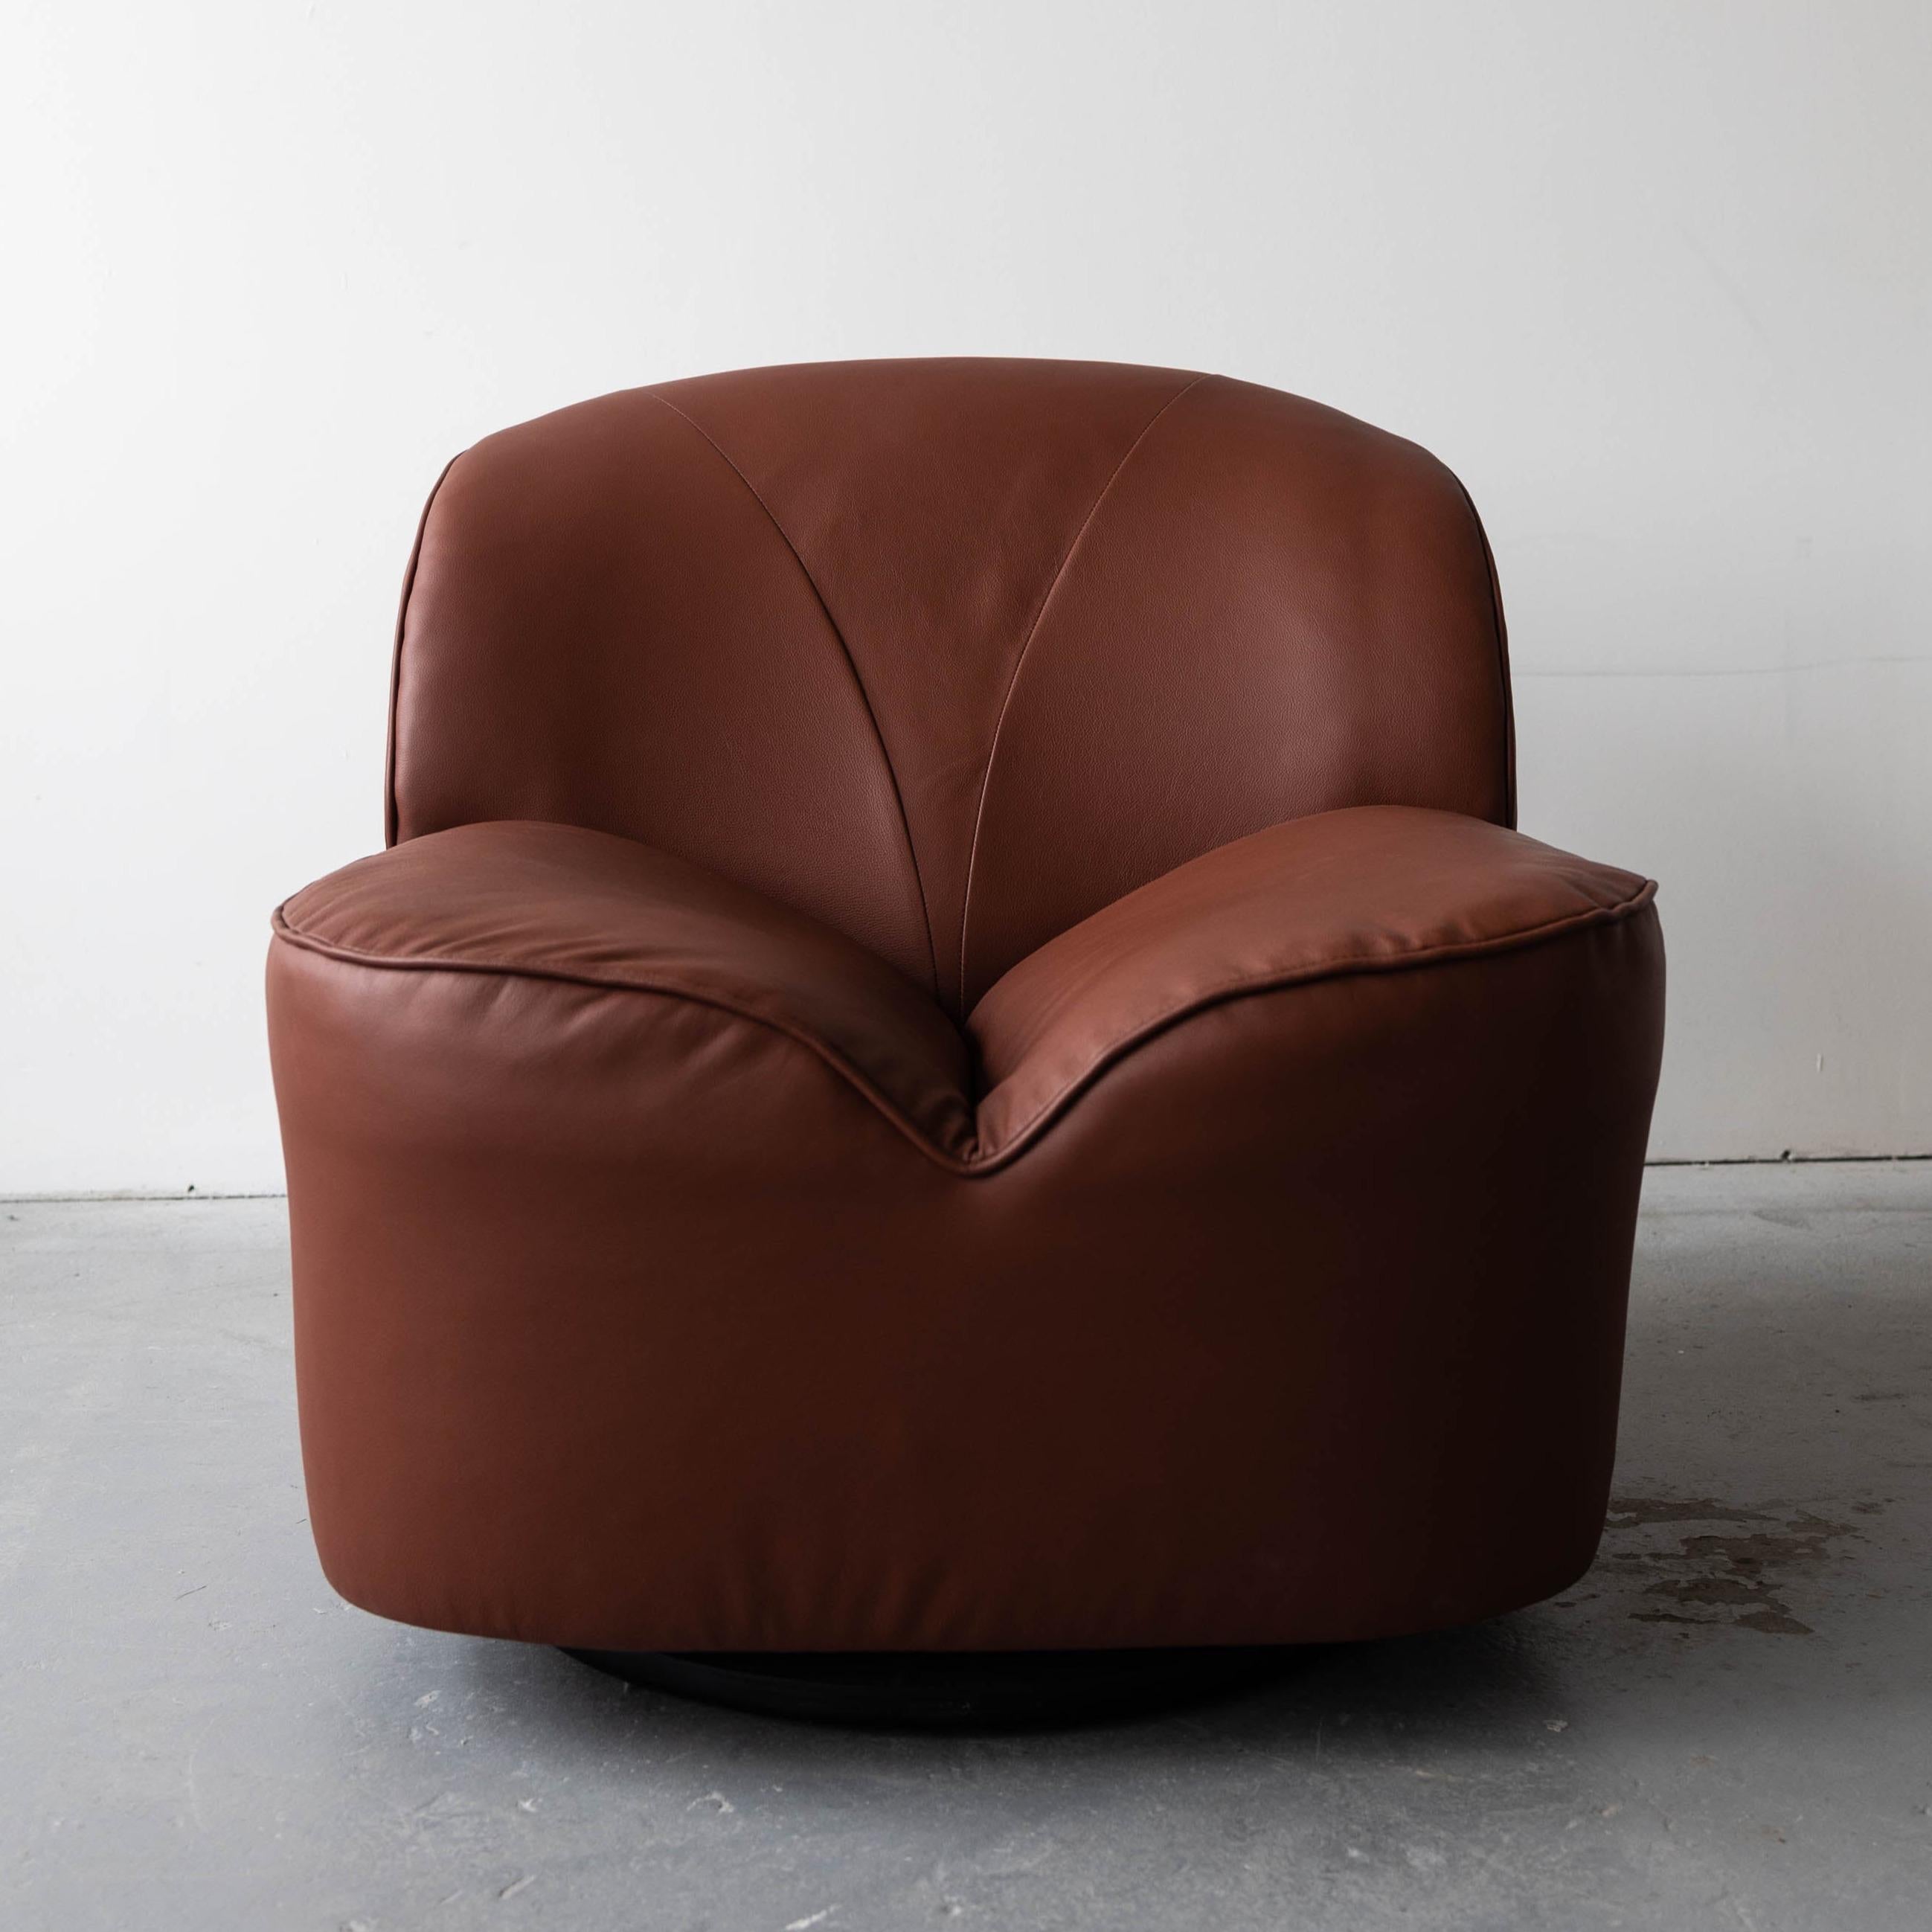 We used the highest quality, Italian full-grain leather by Spinneybeck when we redesigned and reupholstered this vintage swivel / tilt chair by Directional. It is incredibly plush and comfortable and is a great statement piece for any room.